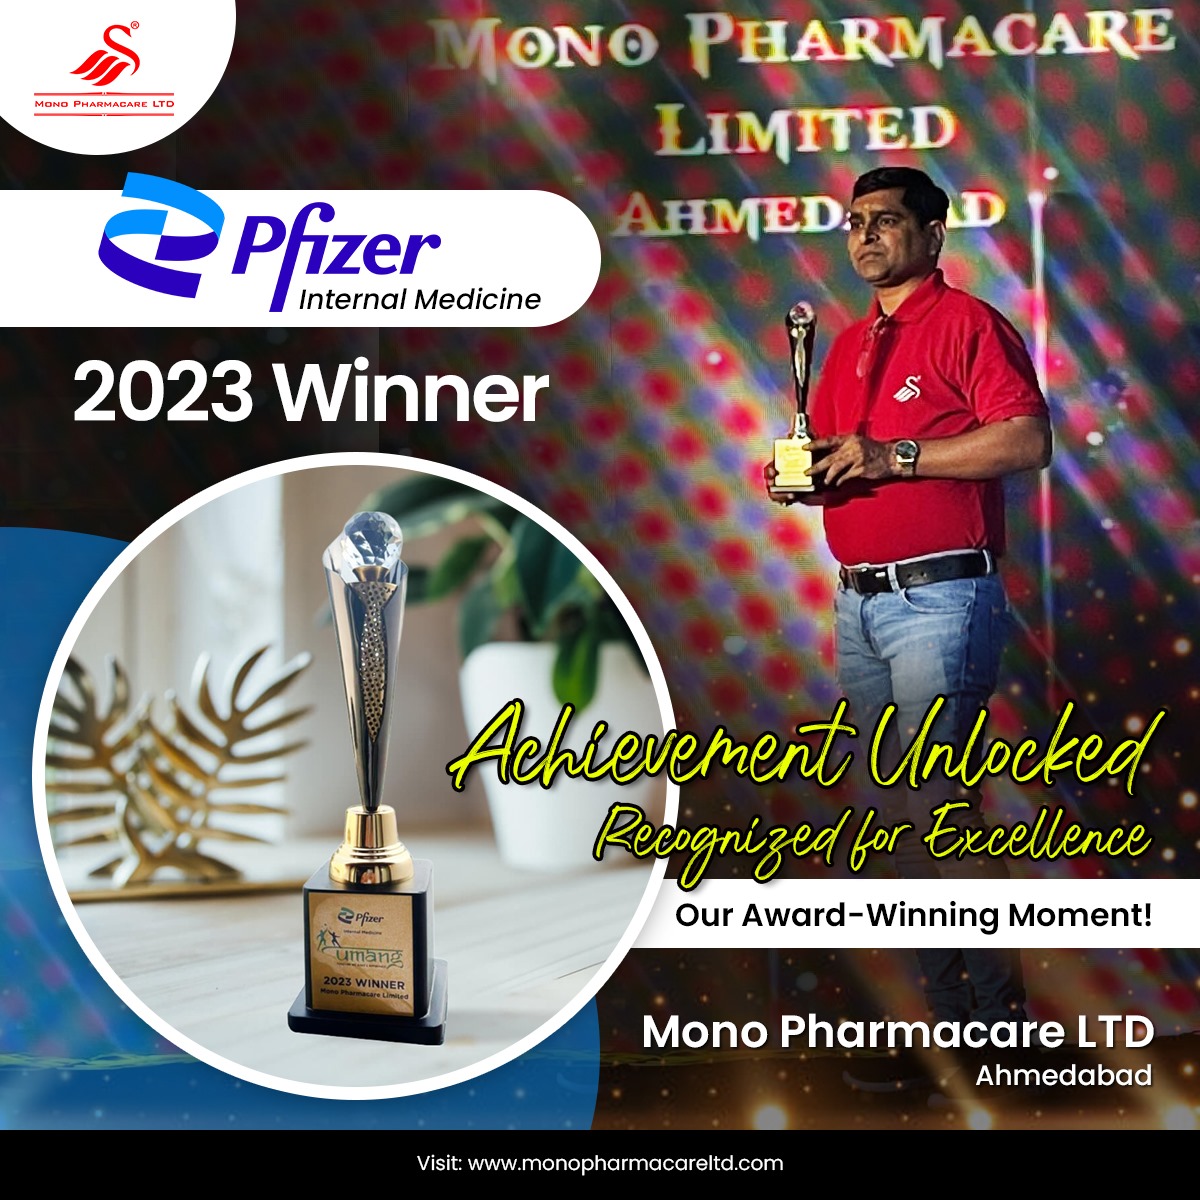 Exciting news! #MonoPharmacare Ltd has been awarded by #Pfizer for our contributions to the healthcare industry in 2023. Thank you to Pfizer for this prestigious honor! 🌟

#HealthcareInnovation #monopharmacareltd #pharmaceuticalcompany #pharma #ahmedabad #awardwinner